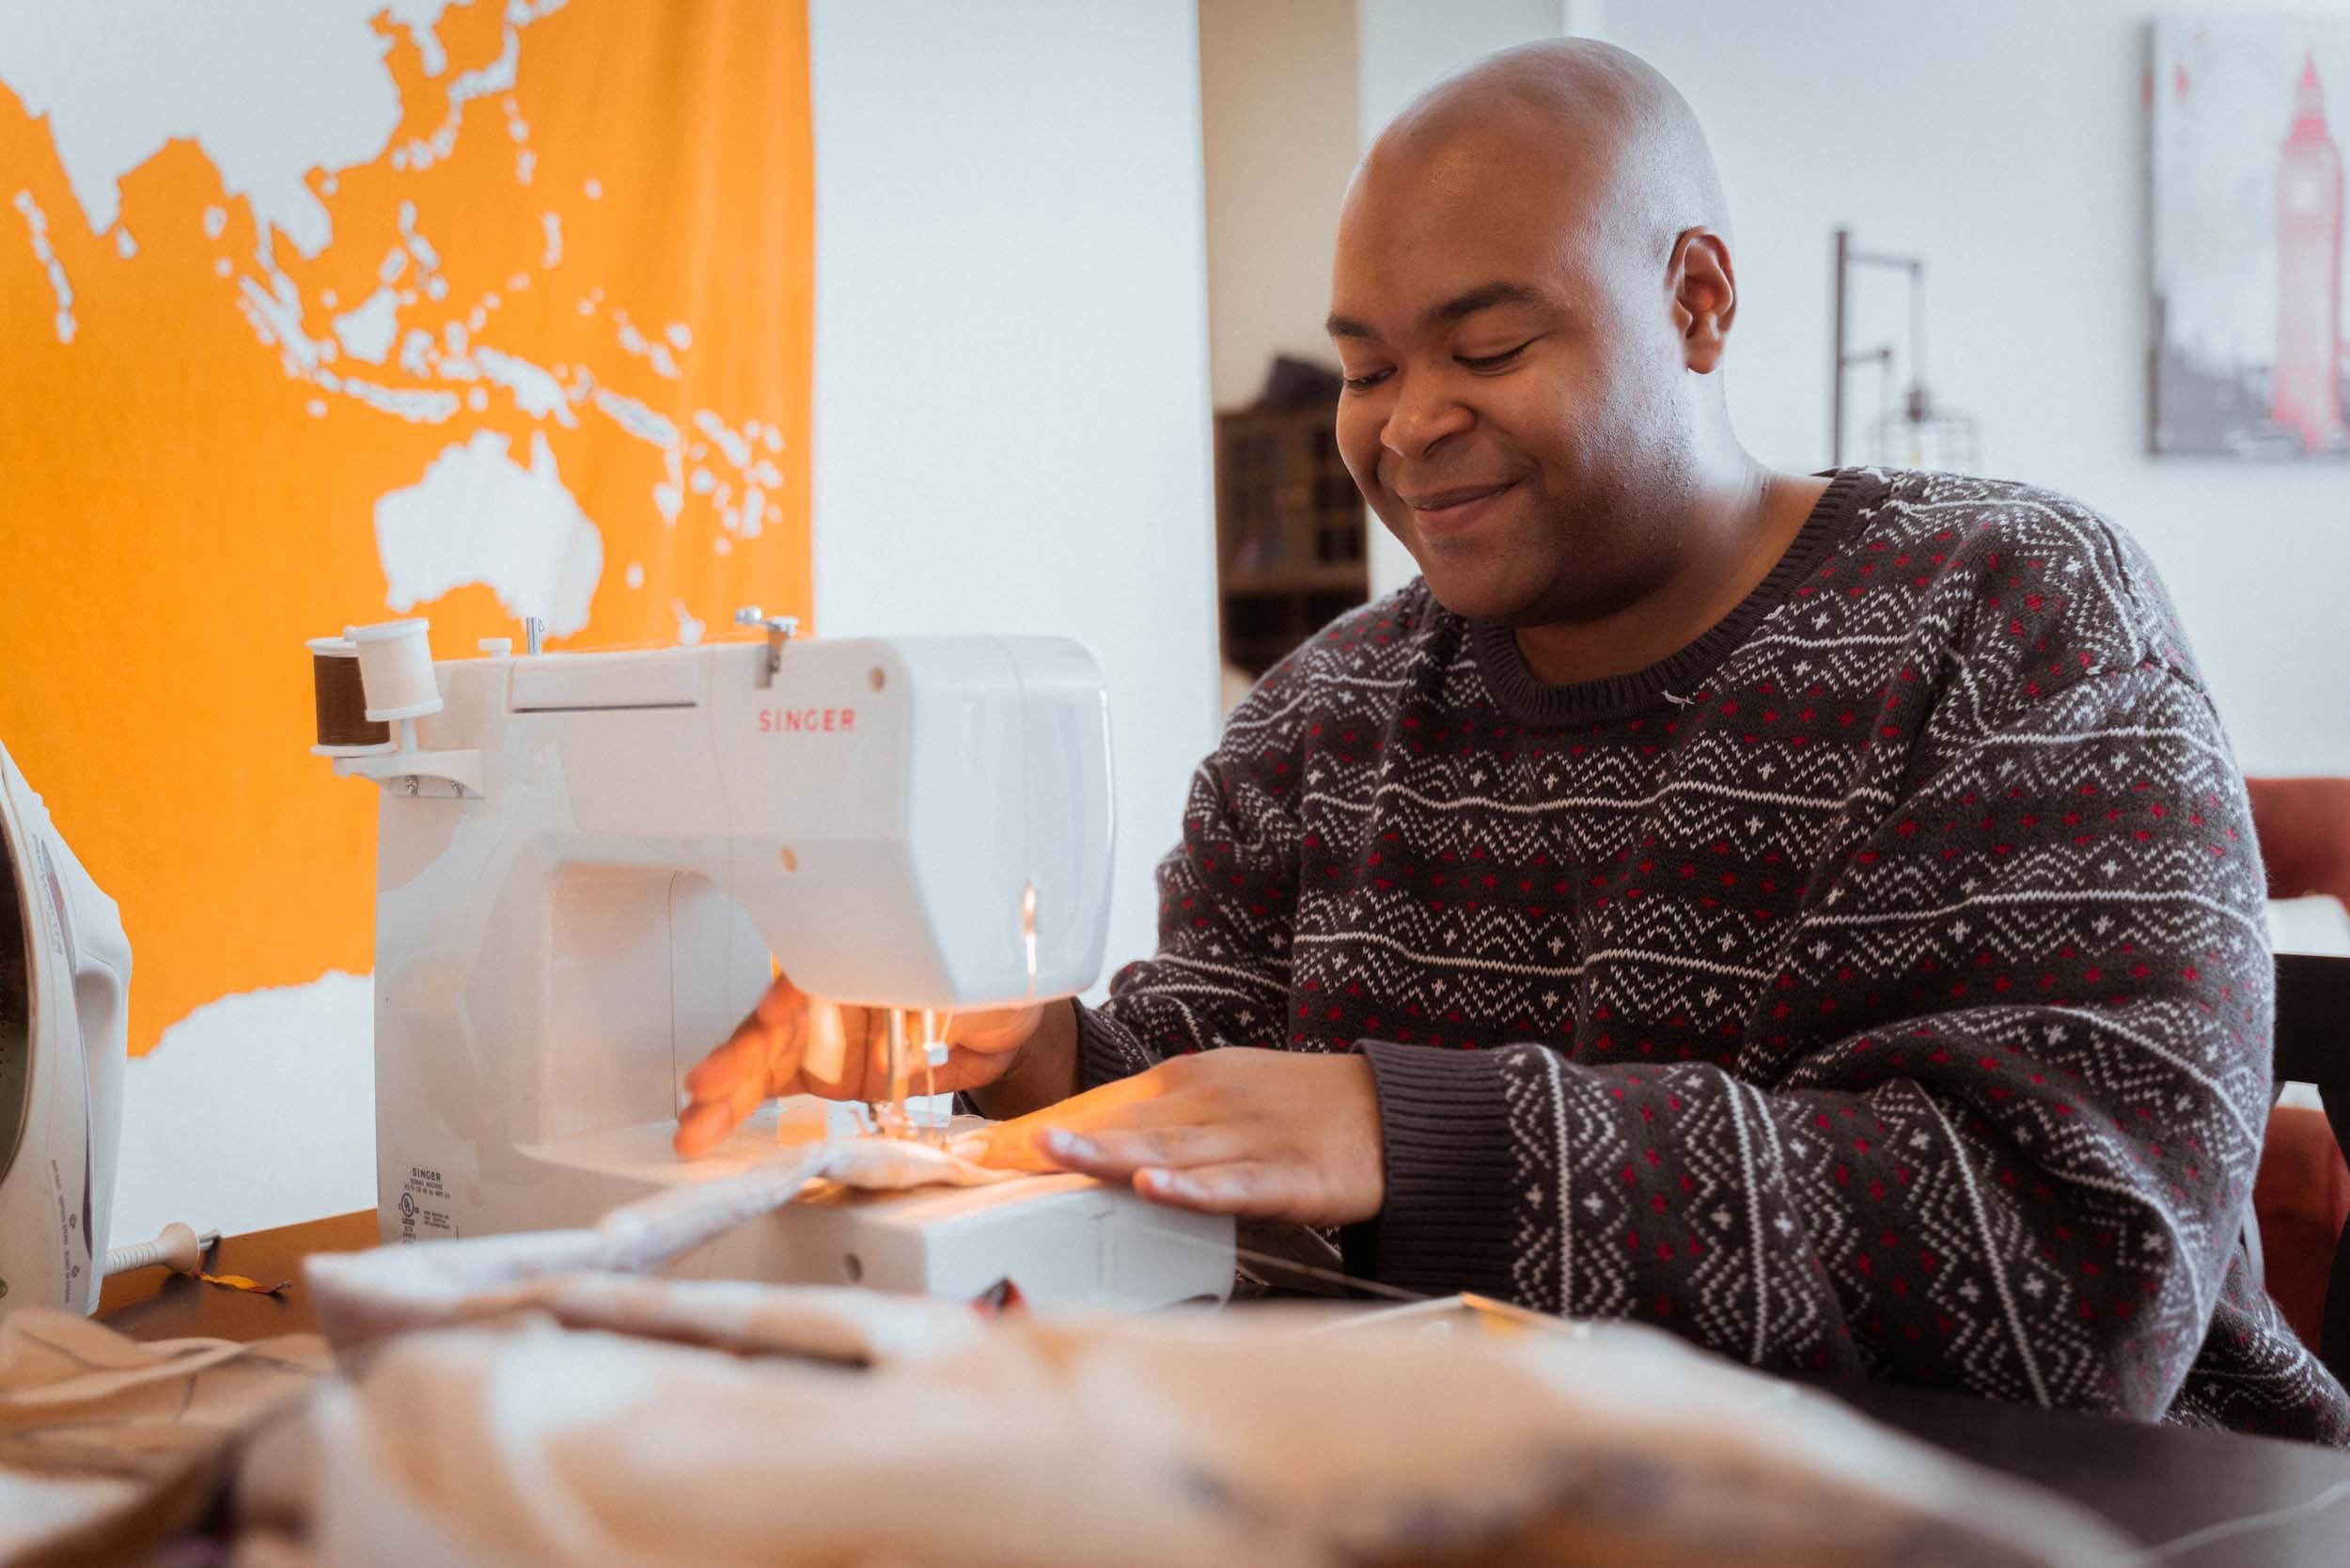 Pictured - A black dressmaker working on a sewing machine | Source: Pexels 